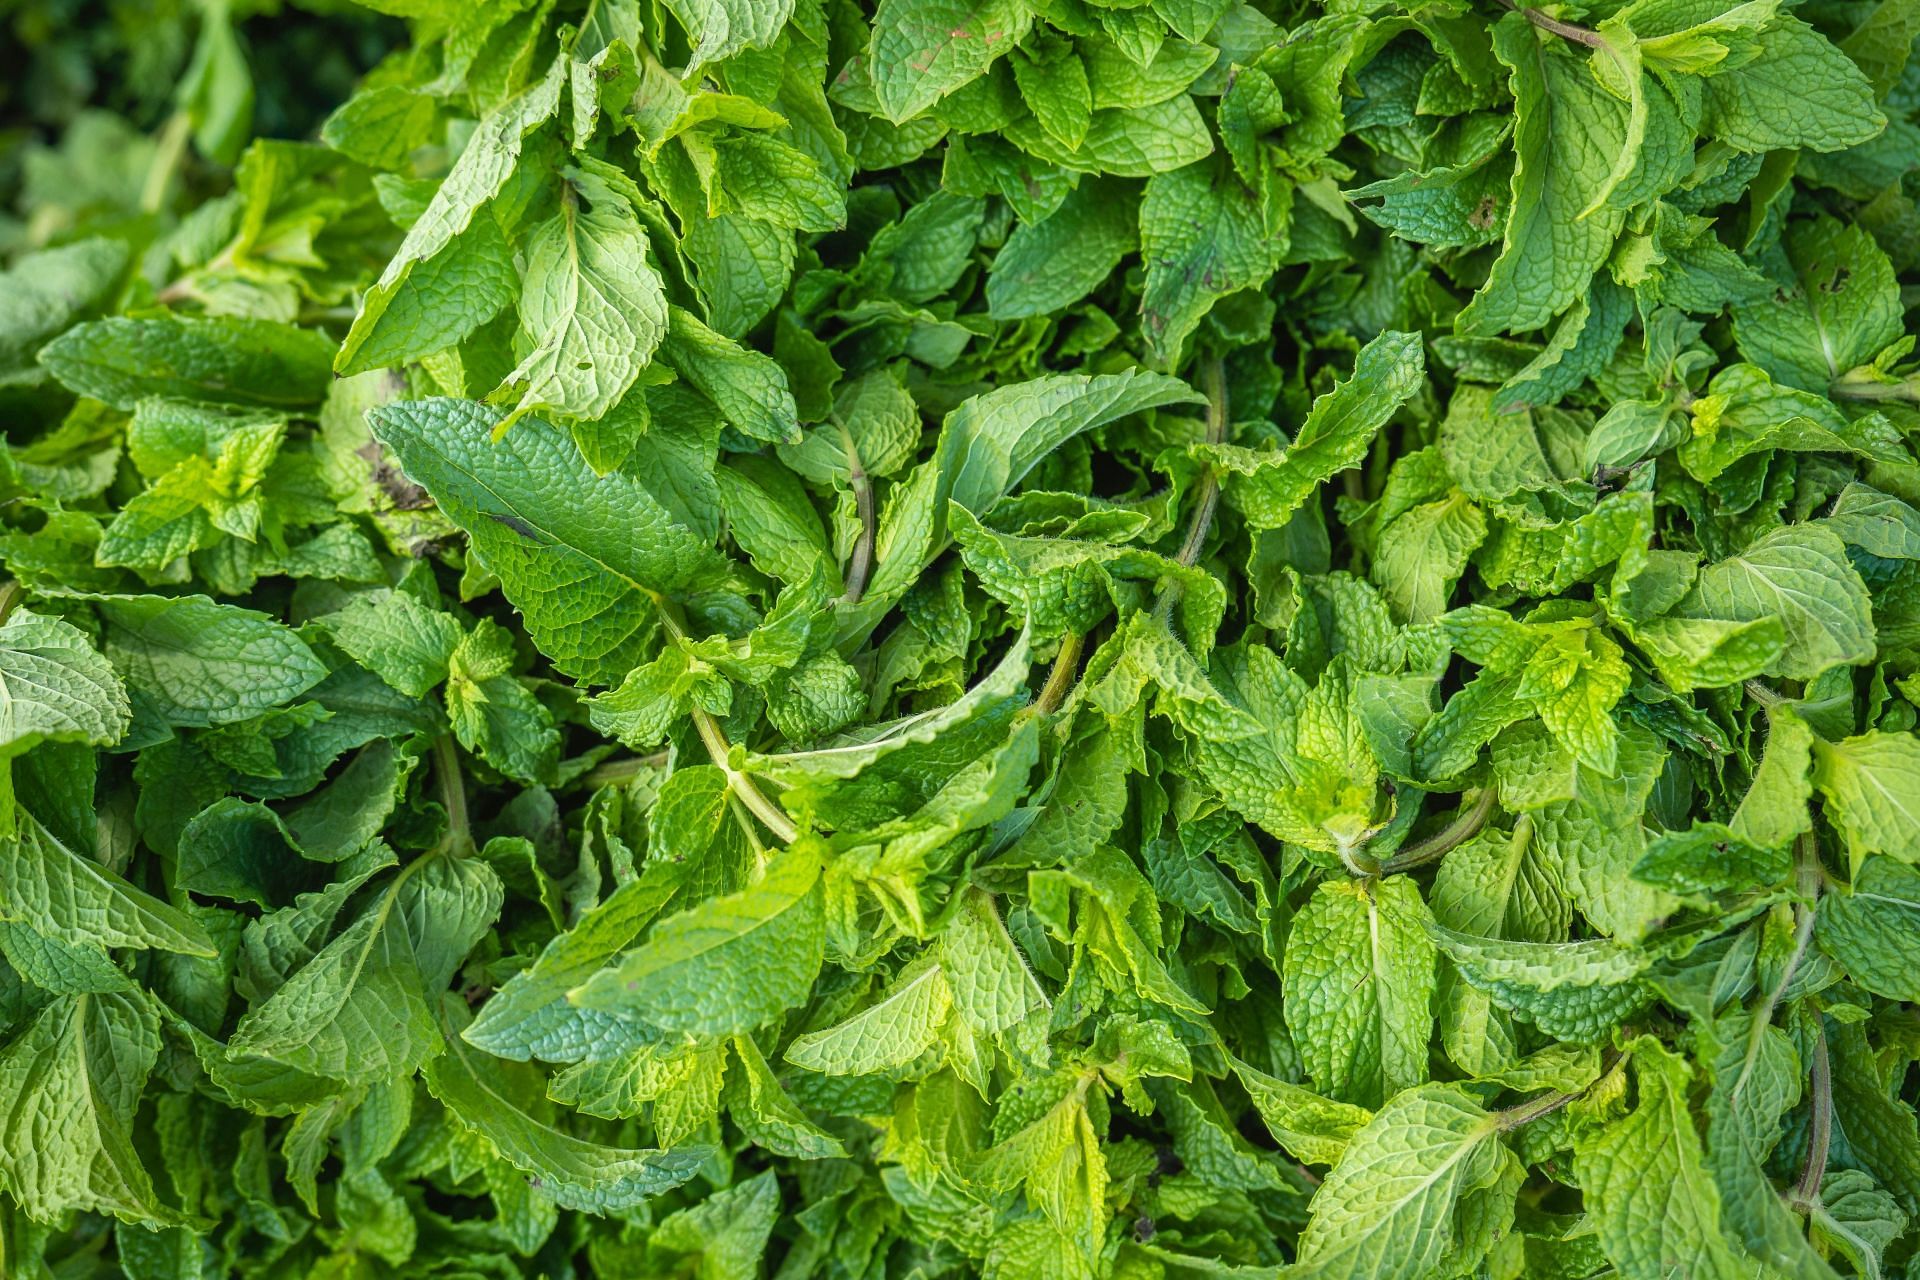 Peppermint may help relieve wisdom tooth pain (Image via Unsplash @Alexander Schimmeck)